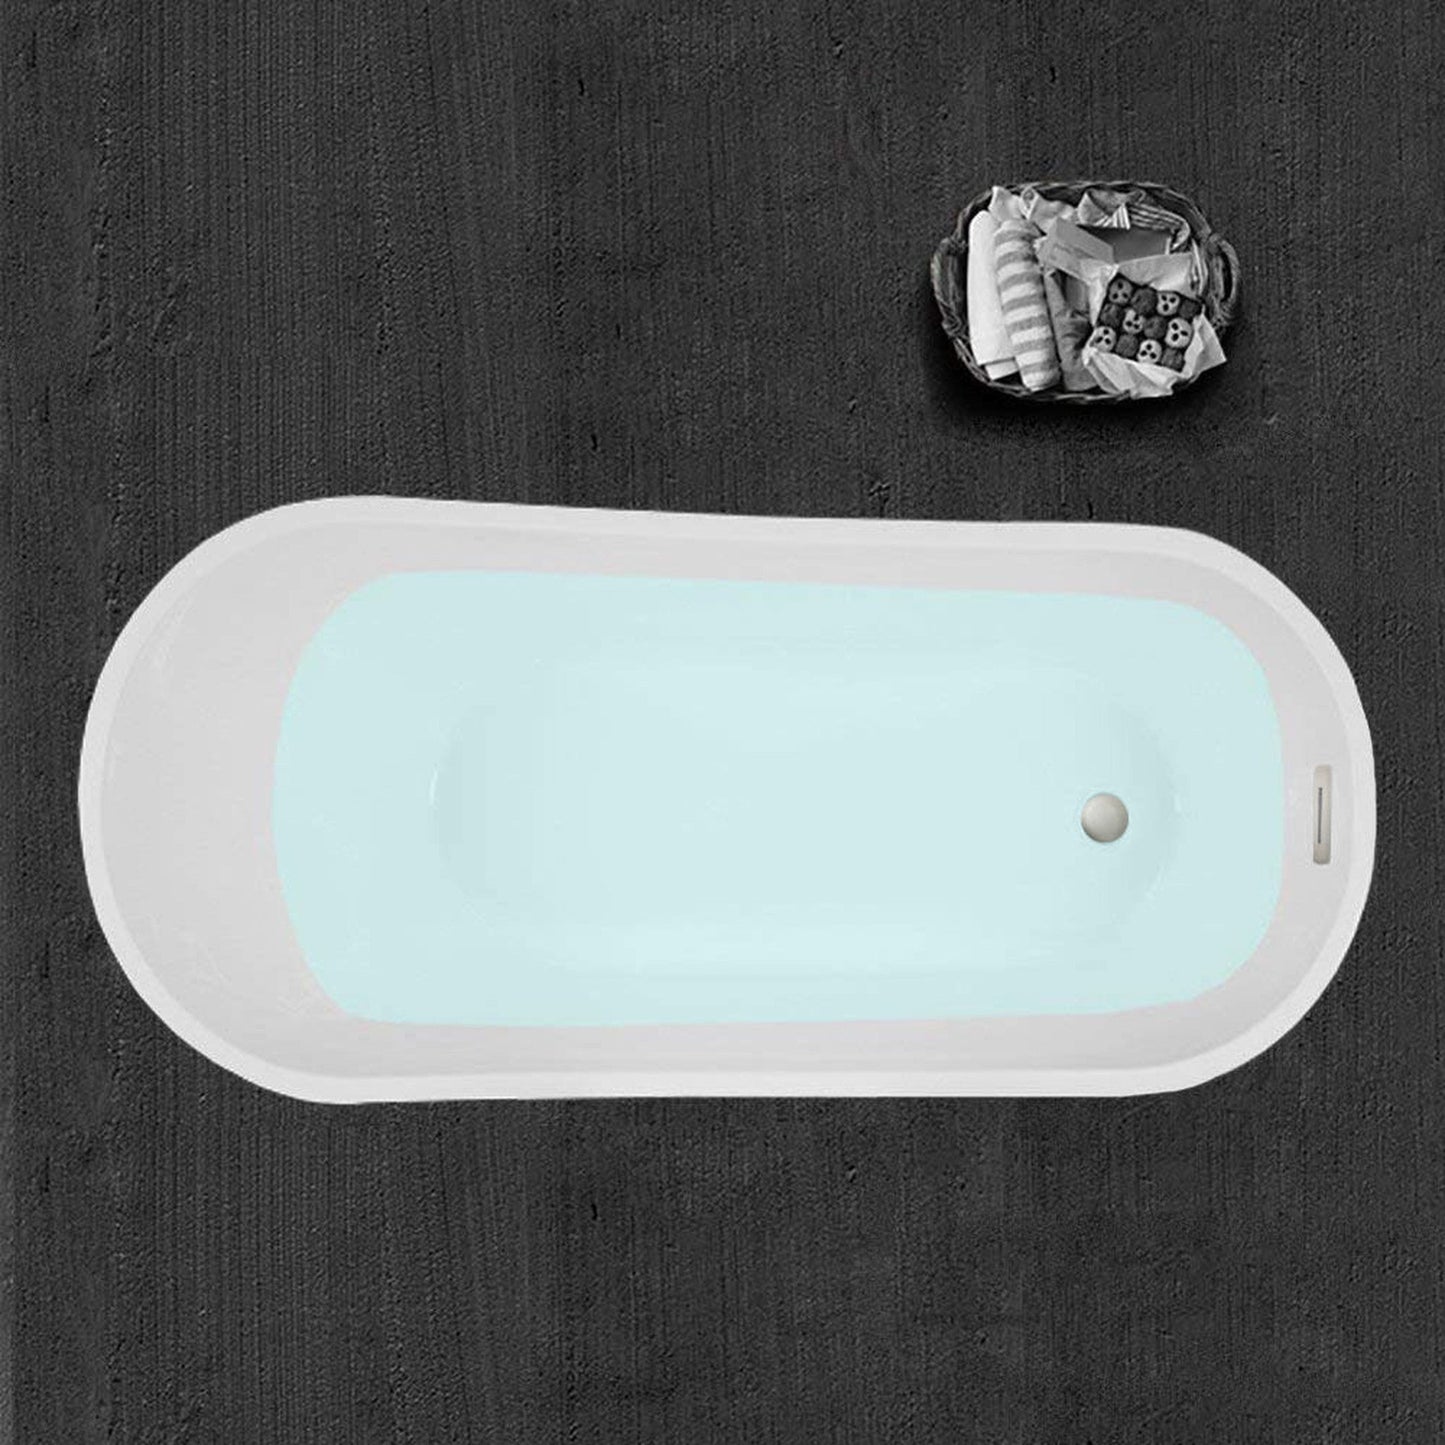 WoodBridge B0001 67" White Acrylic Freestanding Soaking Bathtub With Brushed Nickel Drain, Overflow, F0070BNVT Tub Filler and Caddy Tray